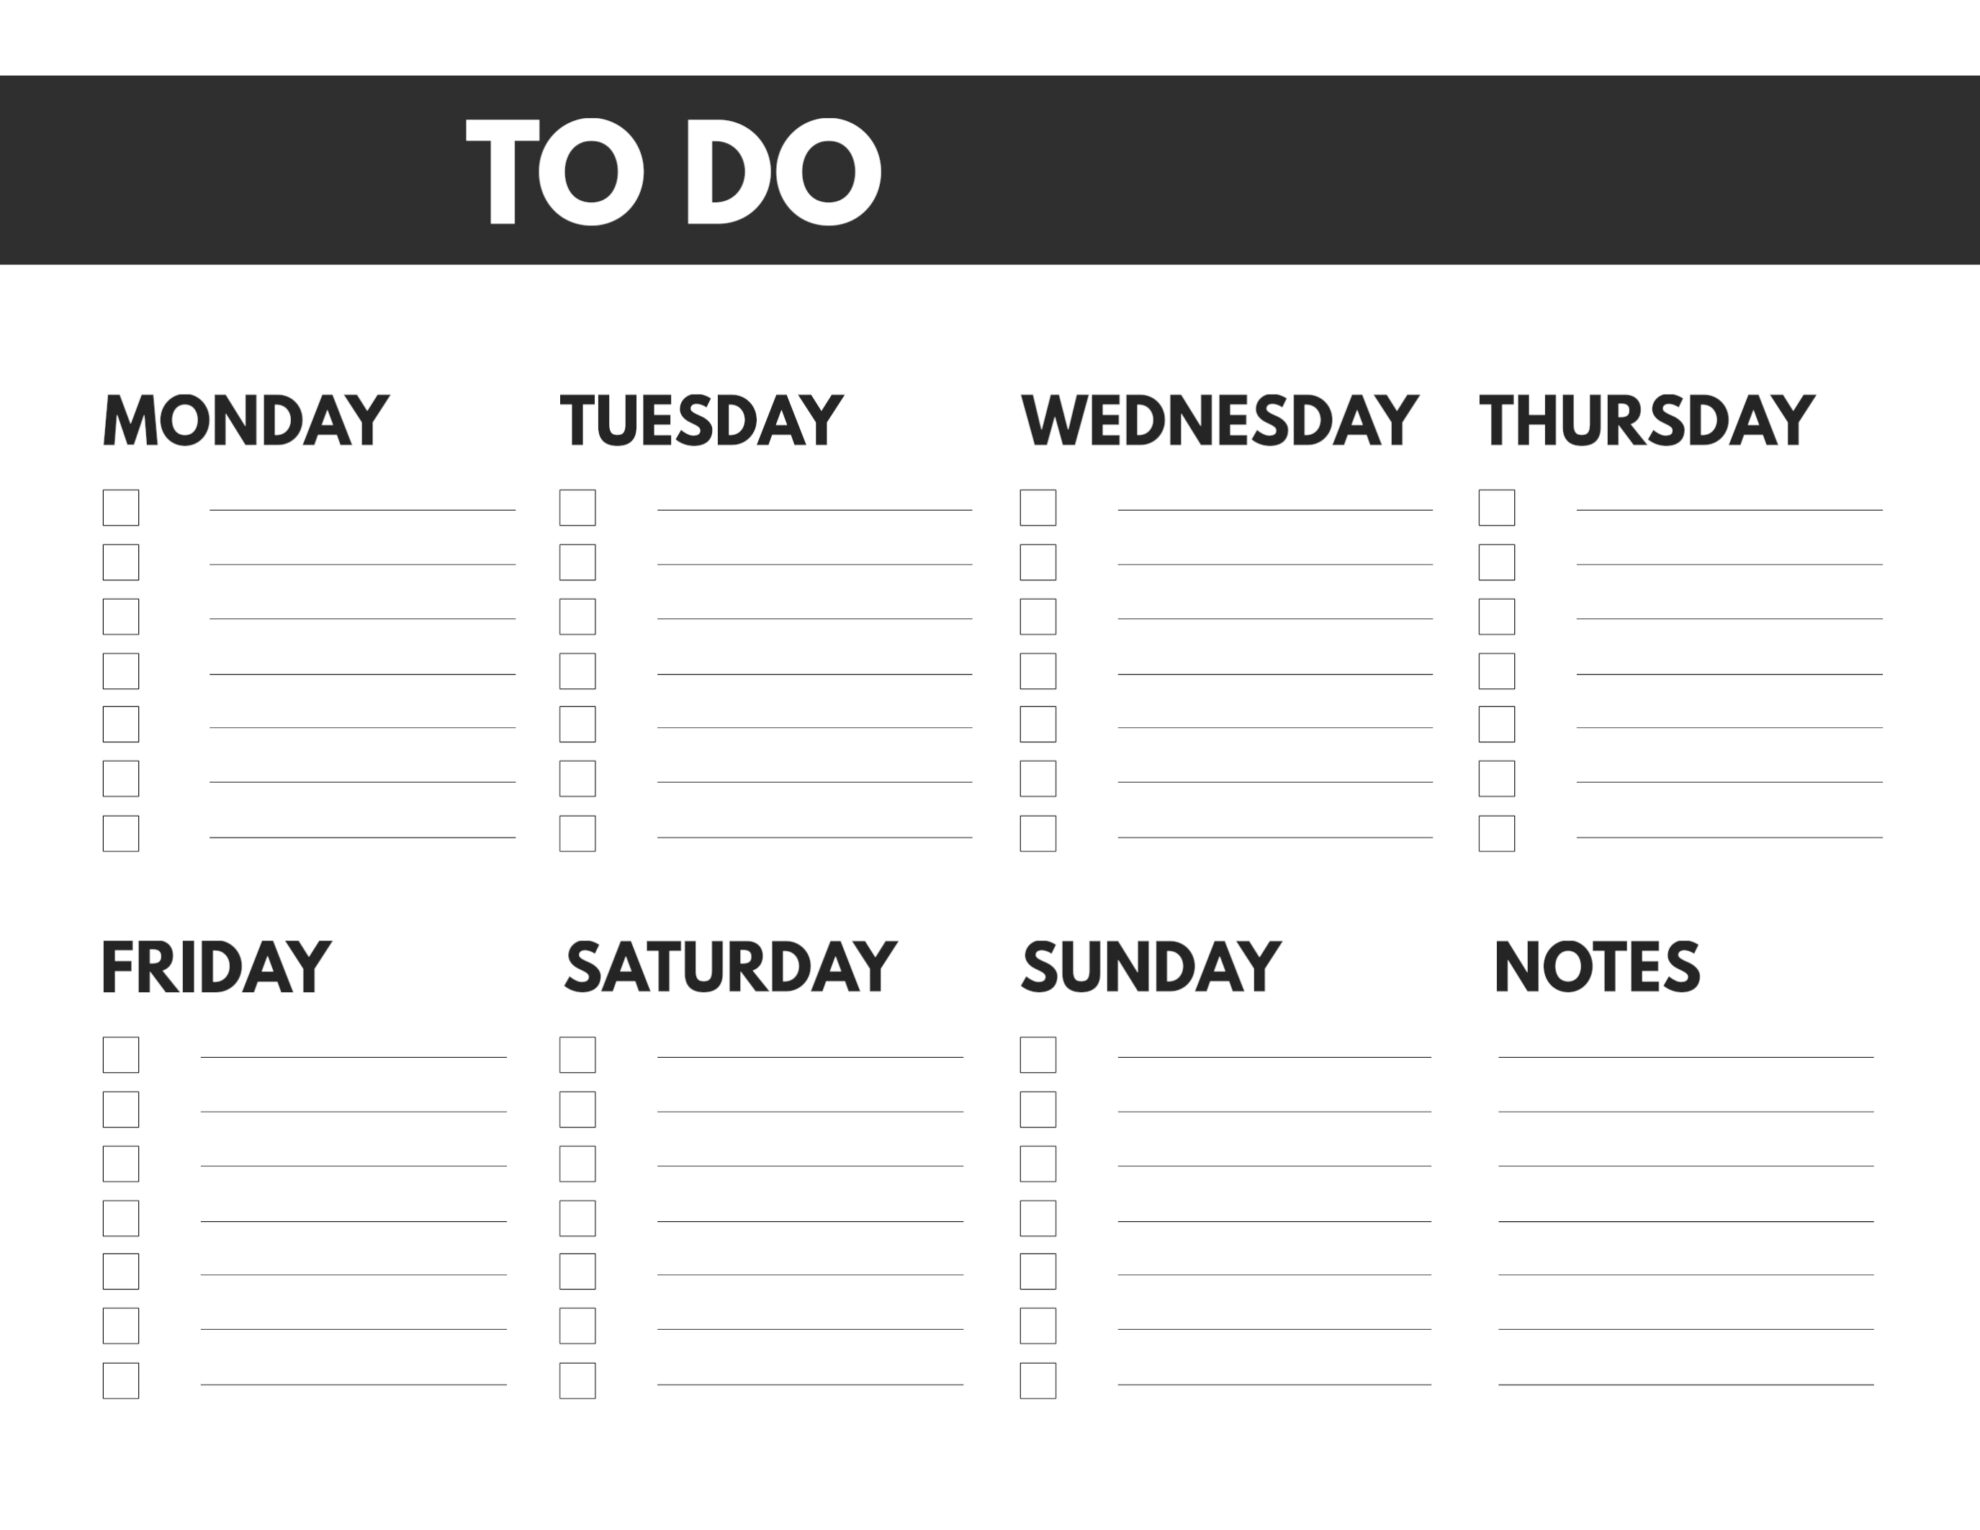 Free Printable Weekly To Do List - Paper Trail Design